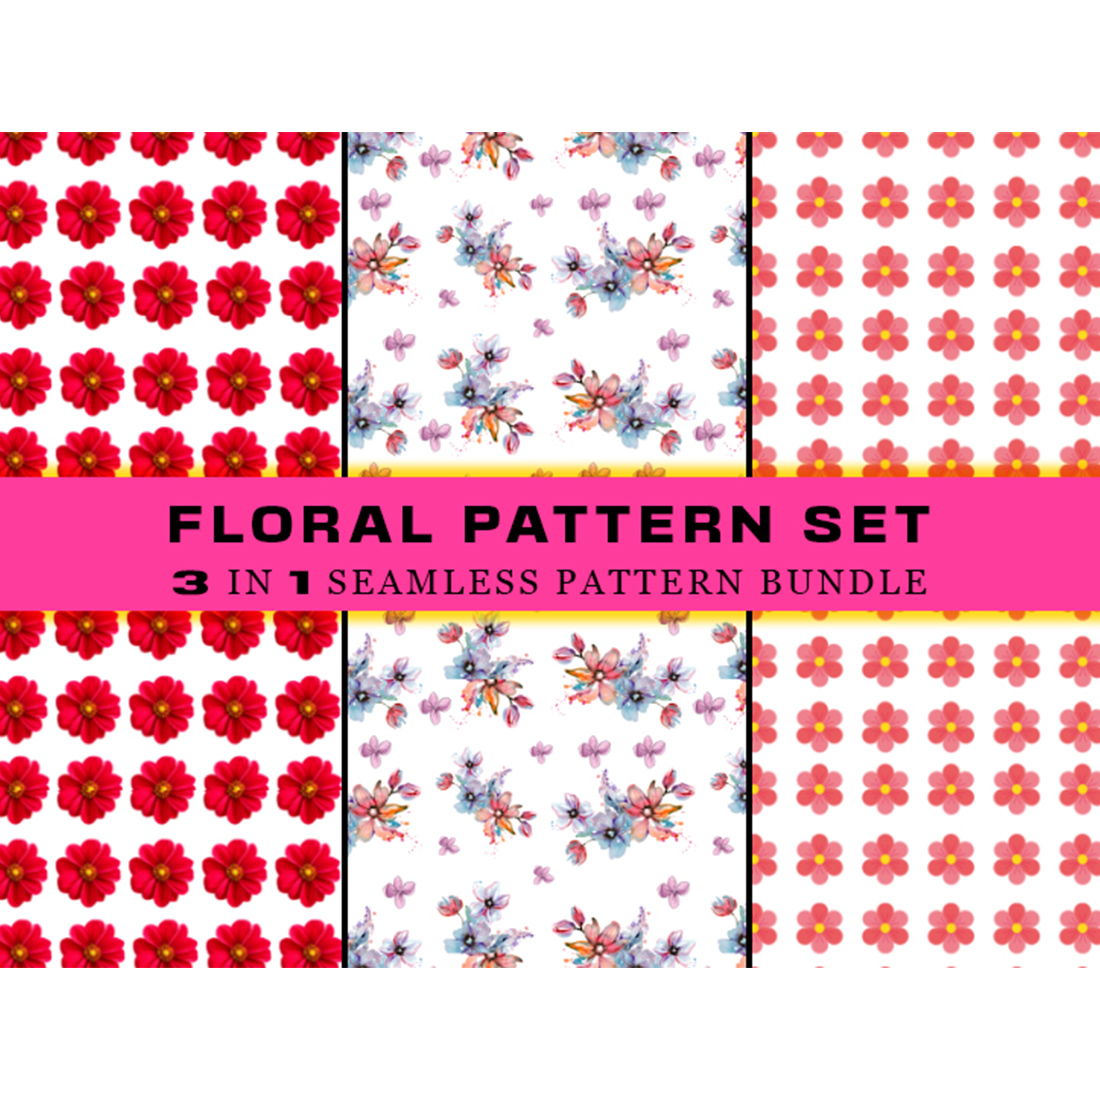 Pack of images of magnificent patterns with flowers